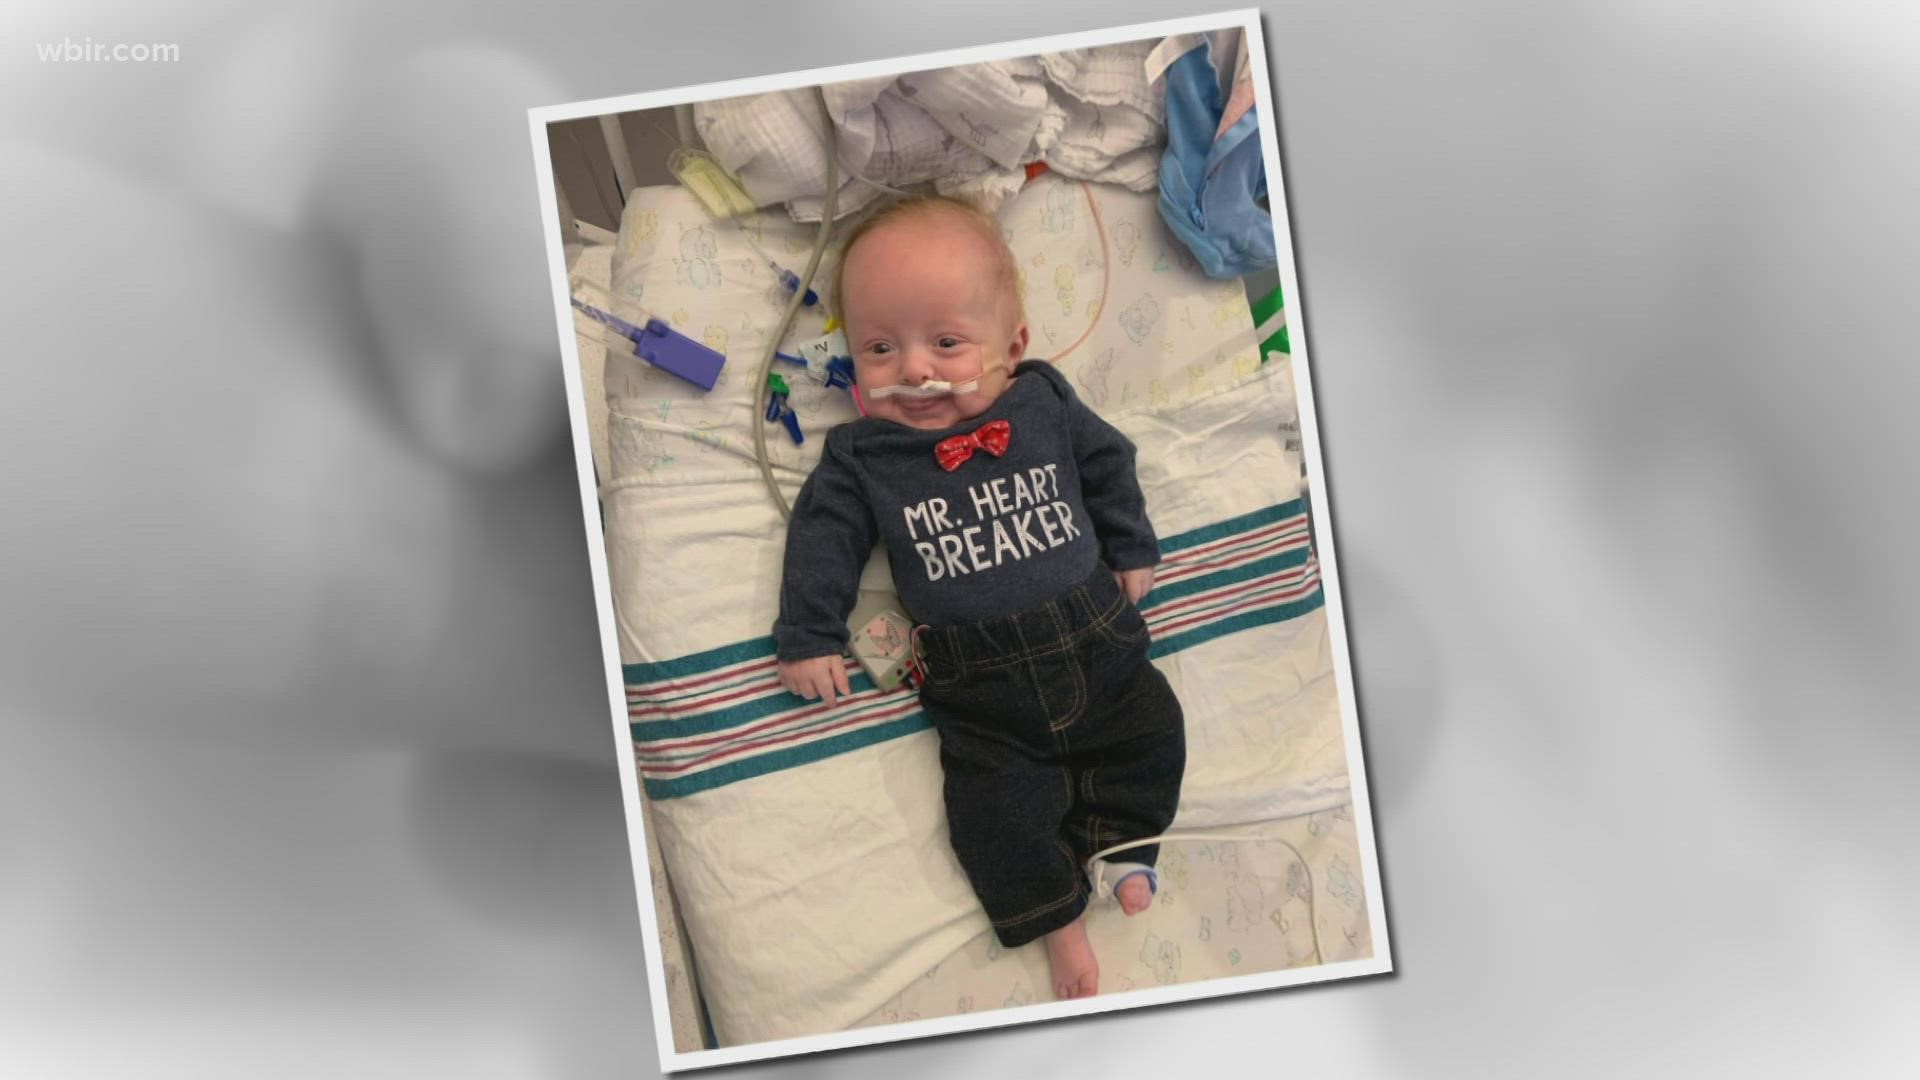 Finley Hickman has been a fighter from the start. Now, he needs a kidney donor to save his life.